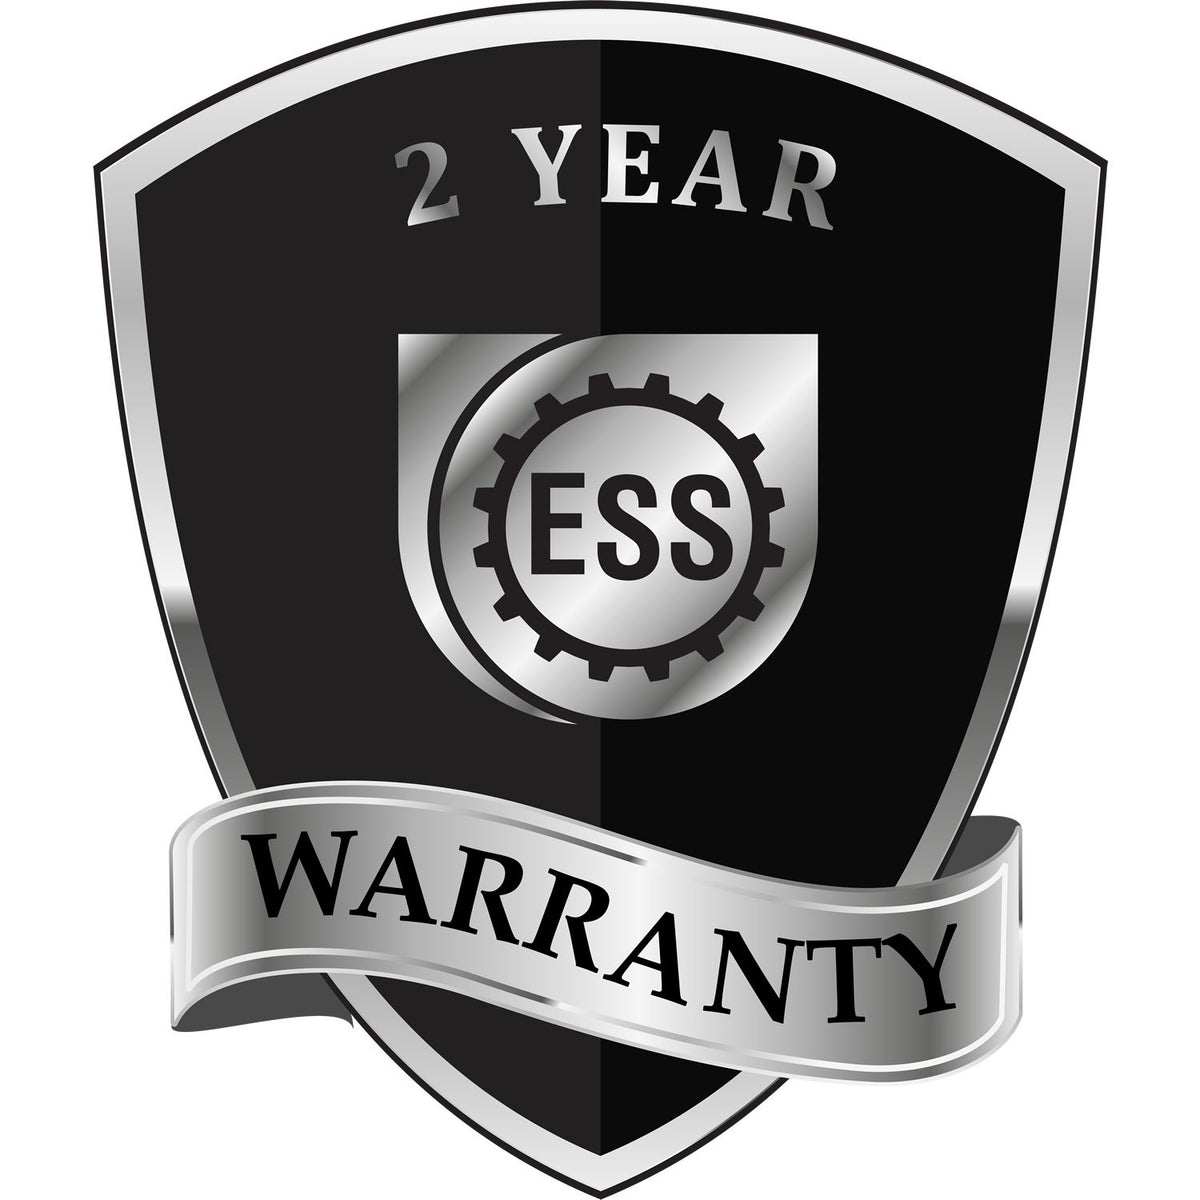 A badge or emblem showing a warranty icon for the Soft Kansas Professional Engineer Seal